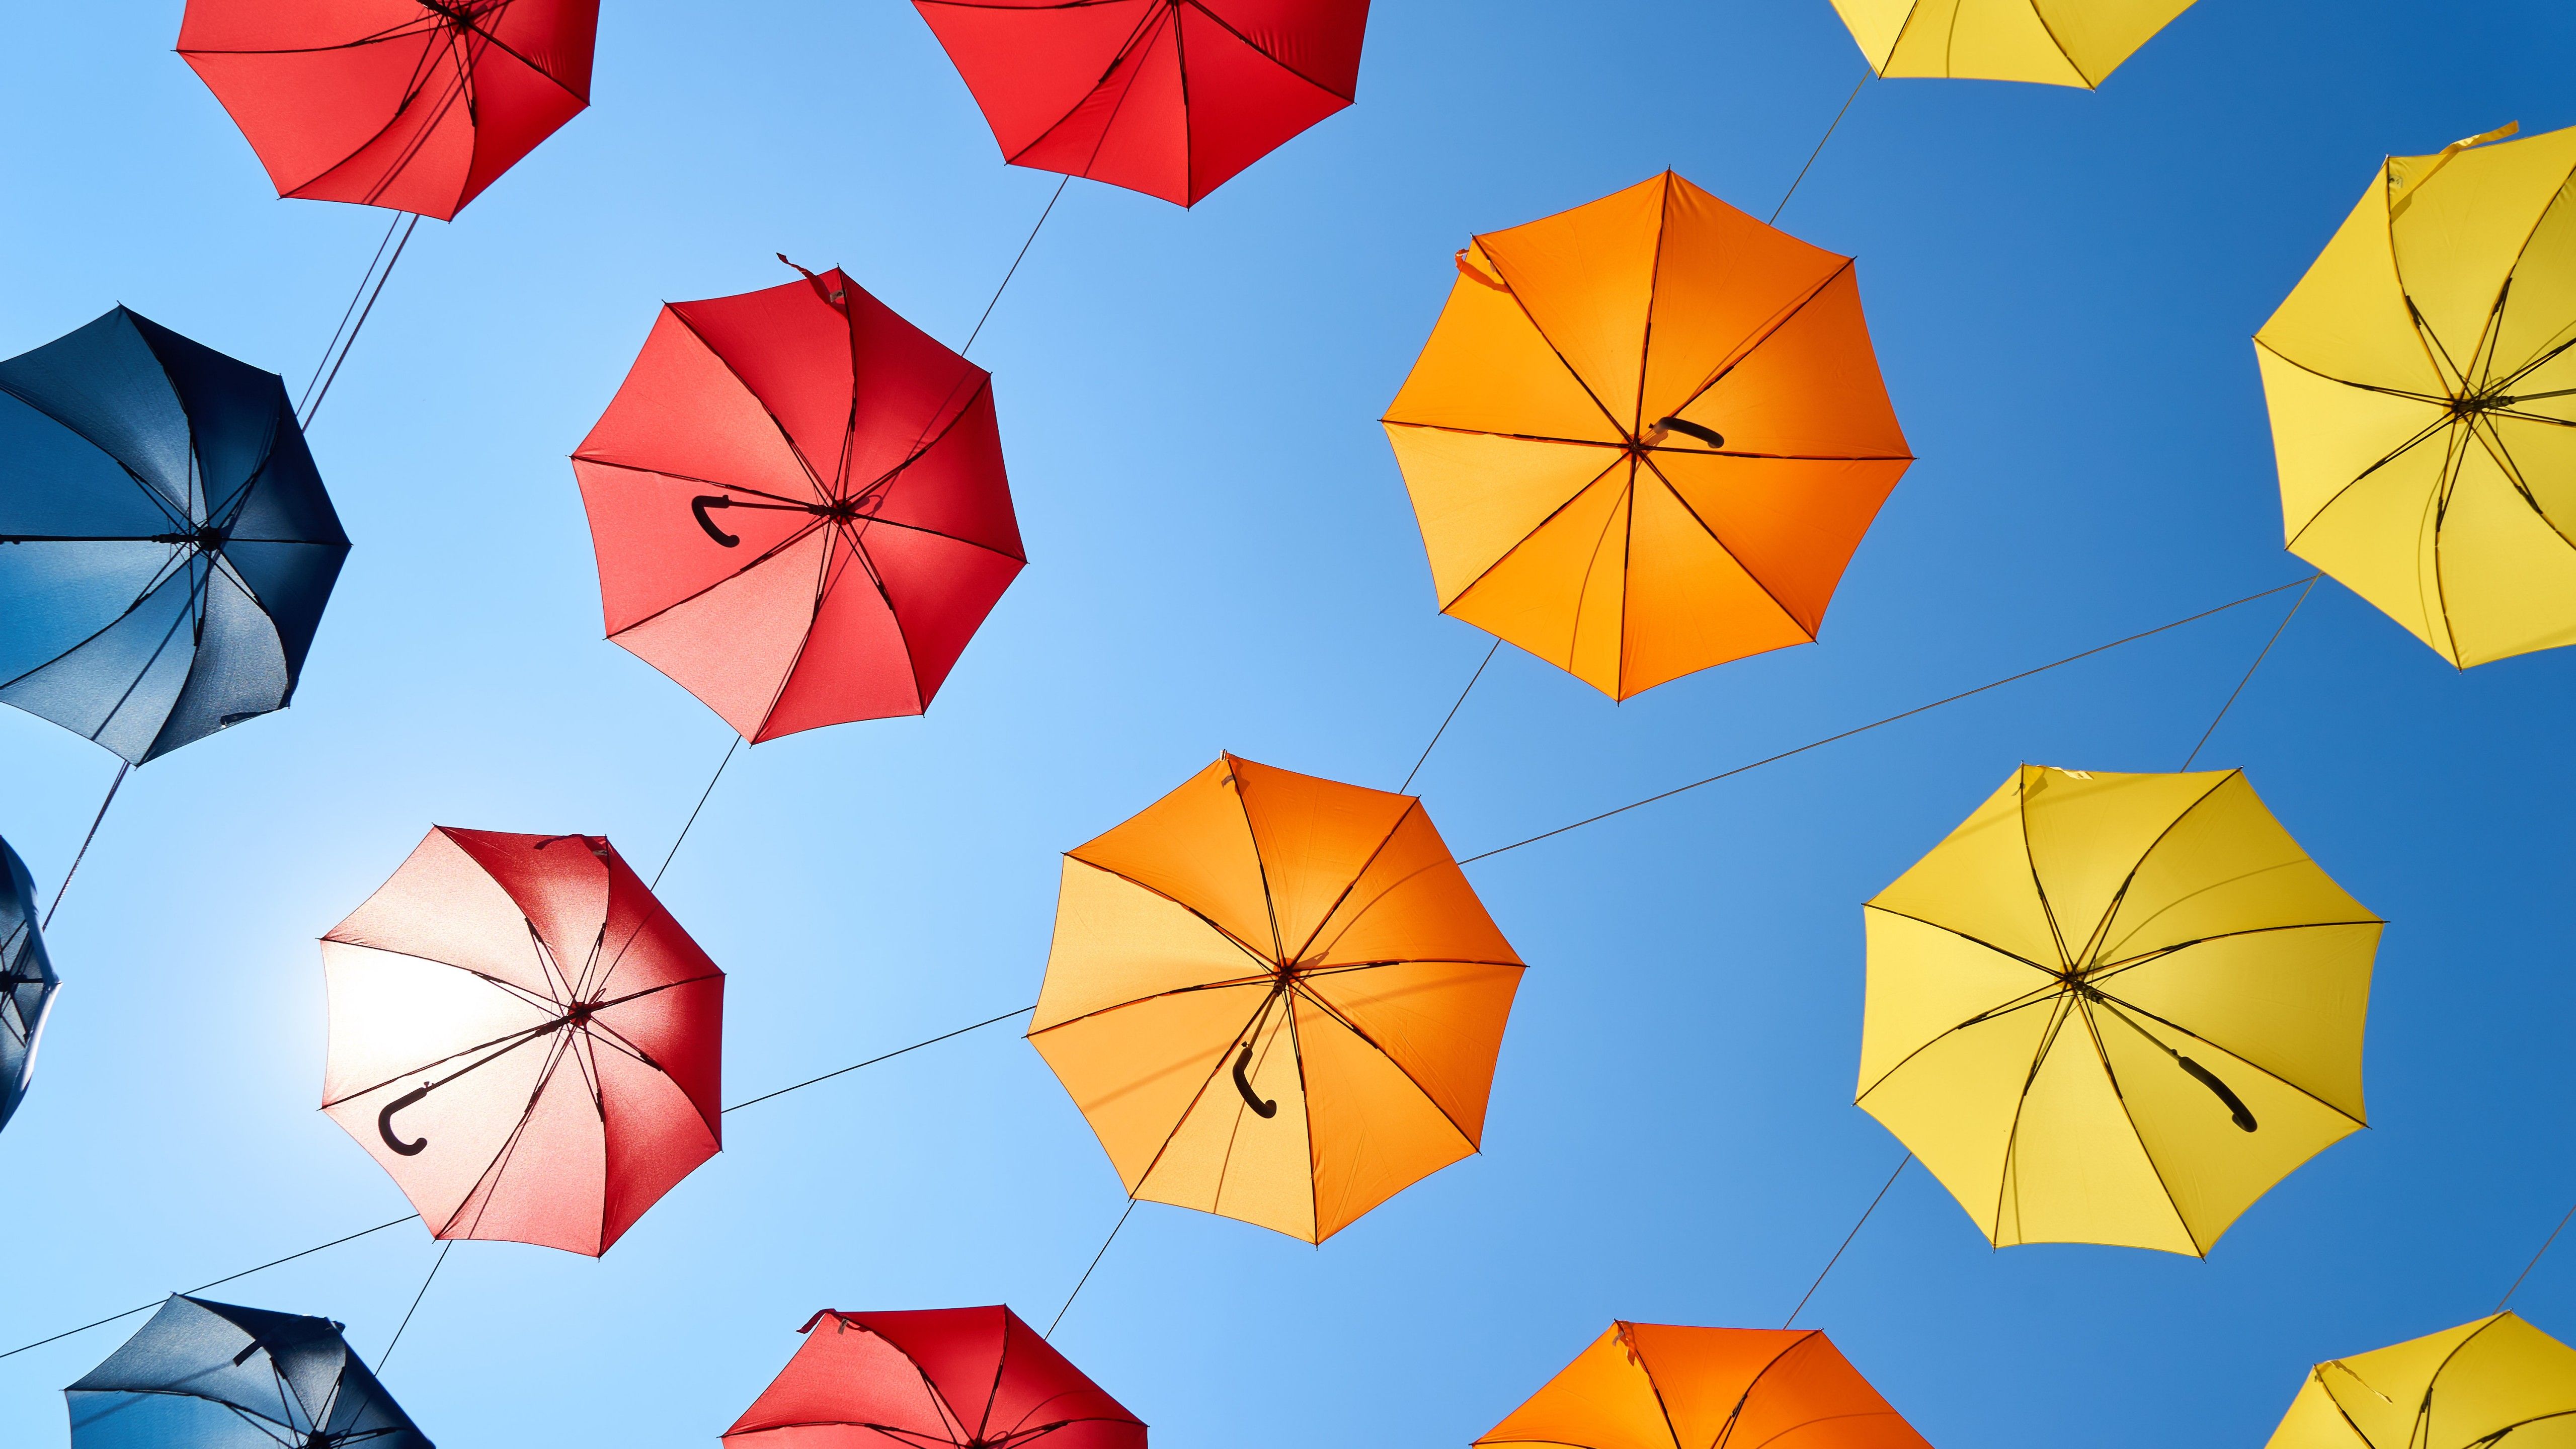 Umbrellas 4K Wallpaper, Blue Sky, Colorful, Sky view, Multicolor, Pattern, Red, Yellow, 5K, Photography